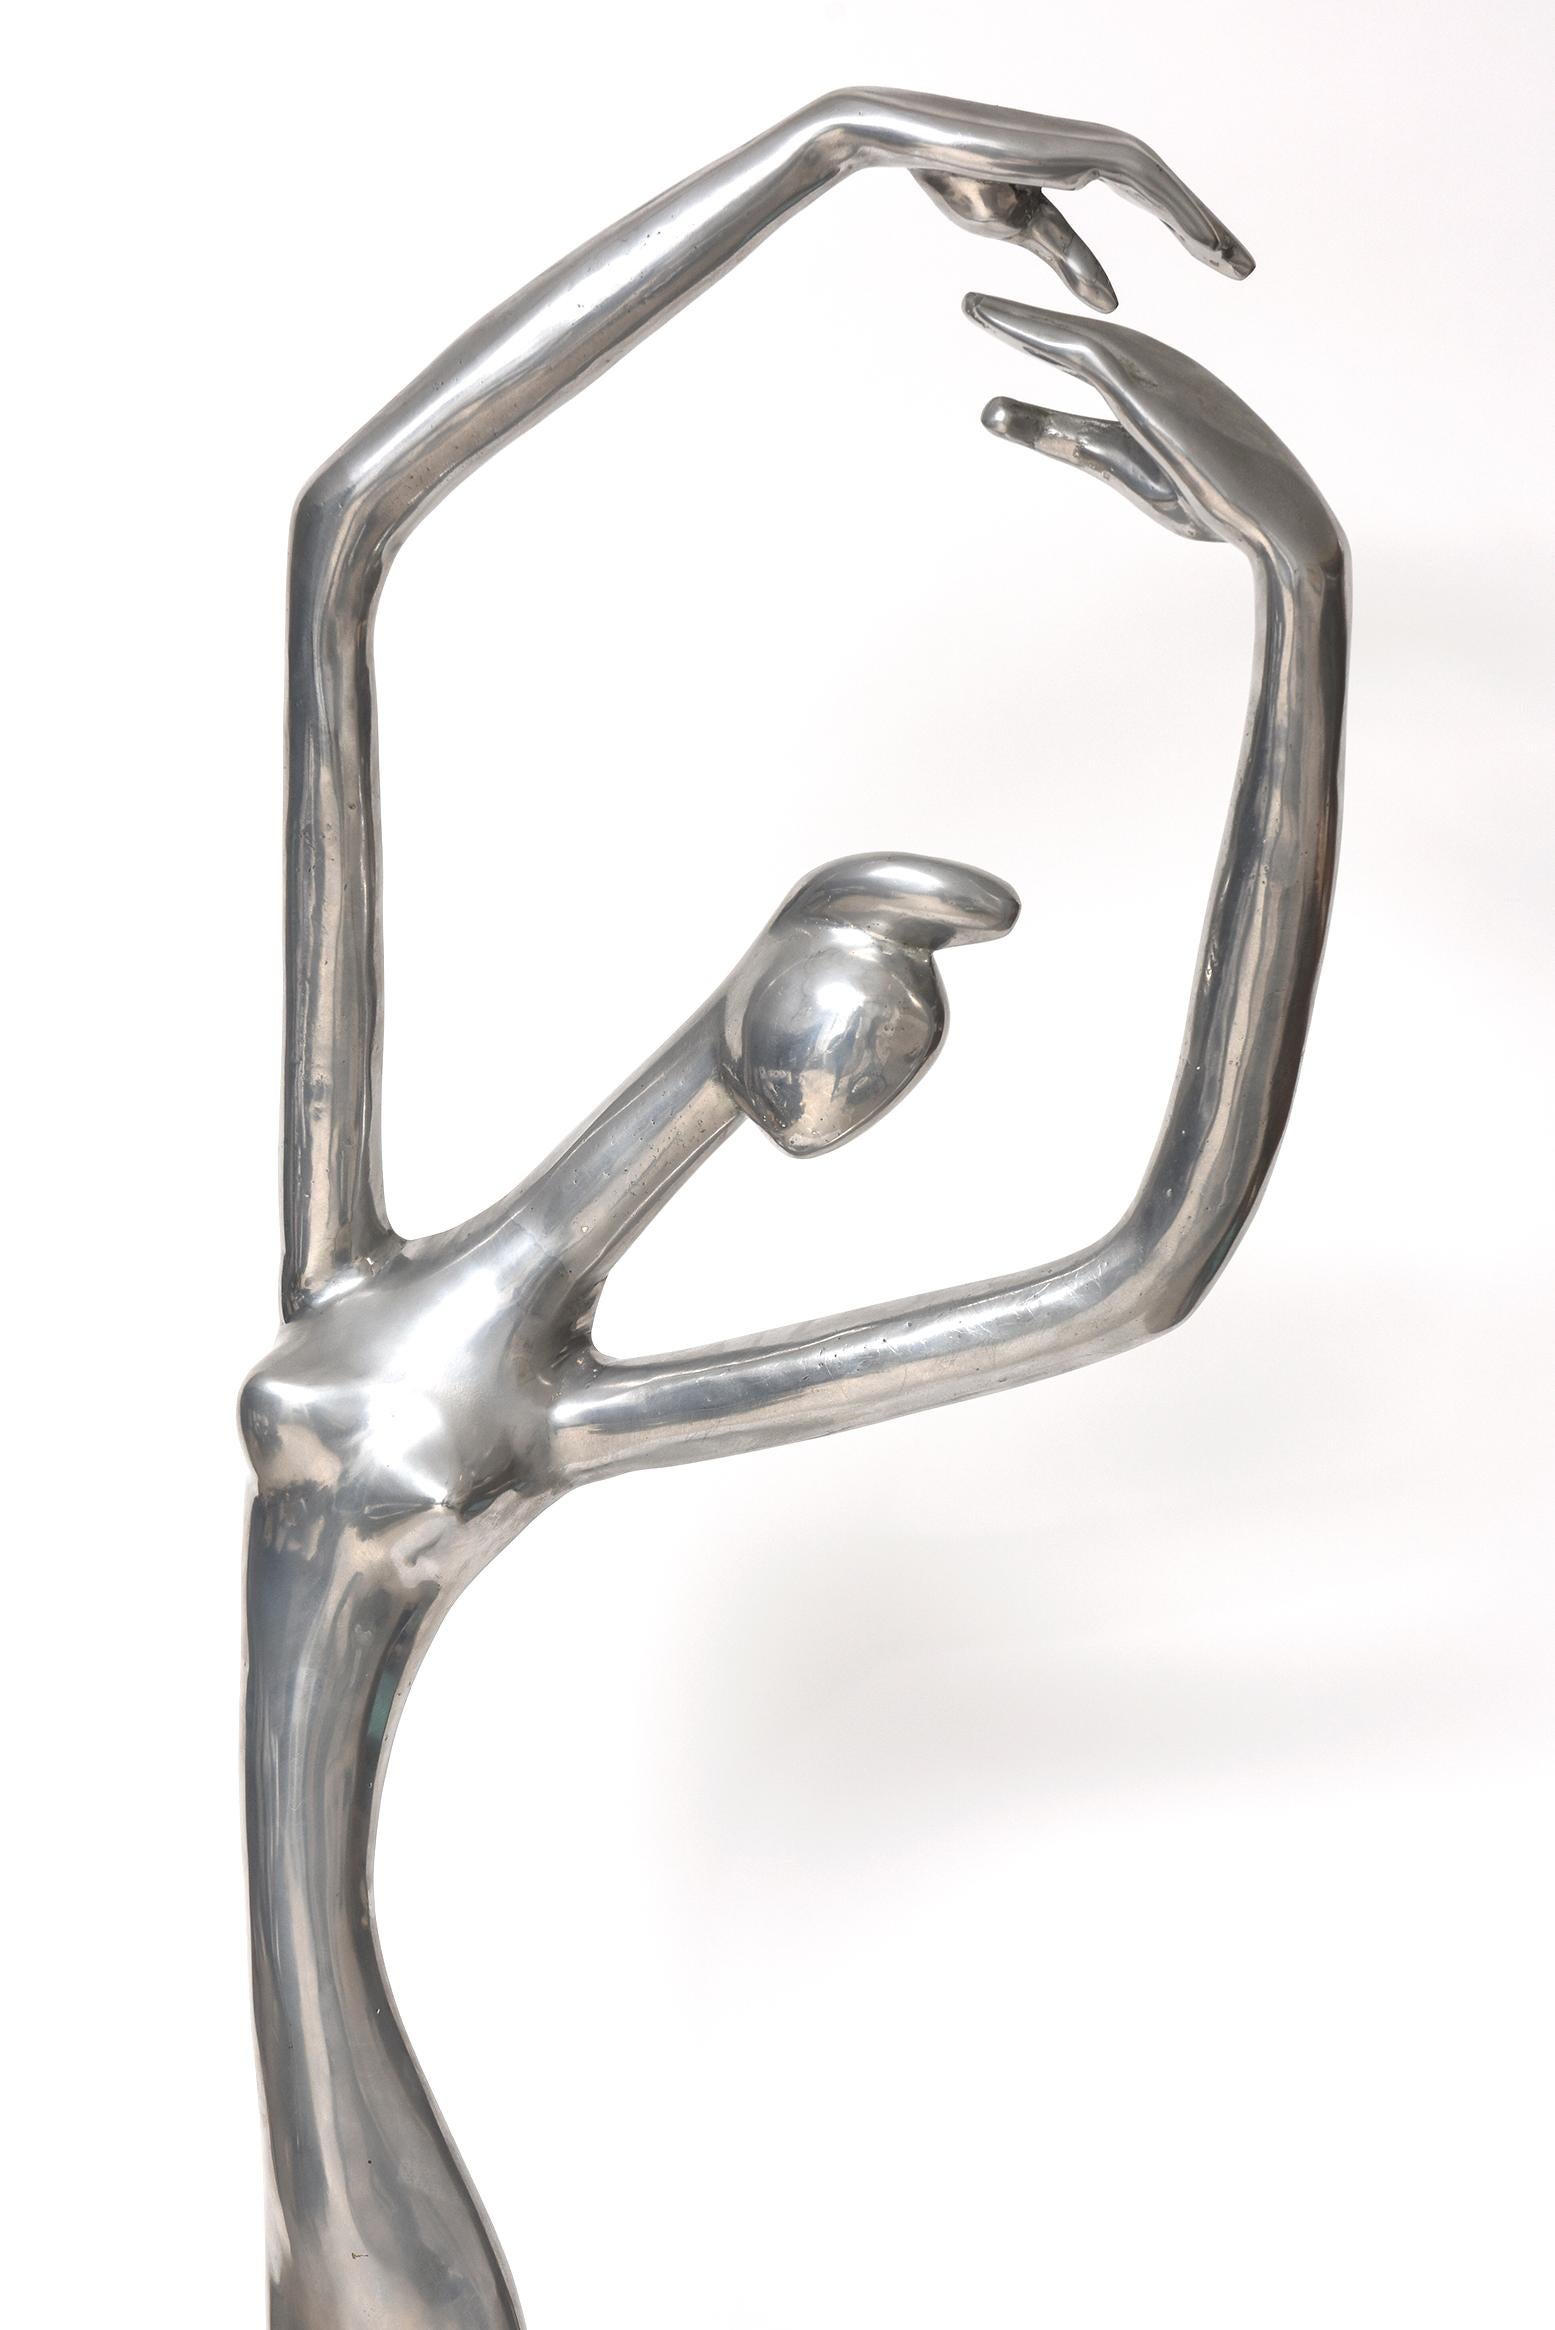 Impressive large dancer aluminum sculpture by Cuban Artist Manuel Carbonell (1918-2011)

On marble stand signed MC. I-I . The marble base is attached.

Including base 67” tall (without base 65.5” tall) by 15.5” wide by 3.5” deep at sculpture